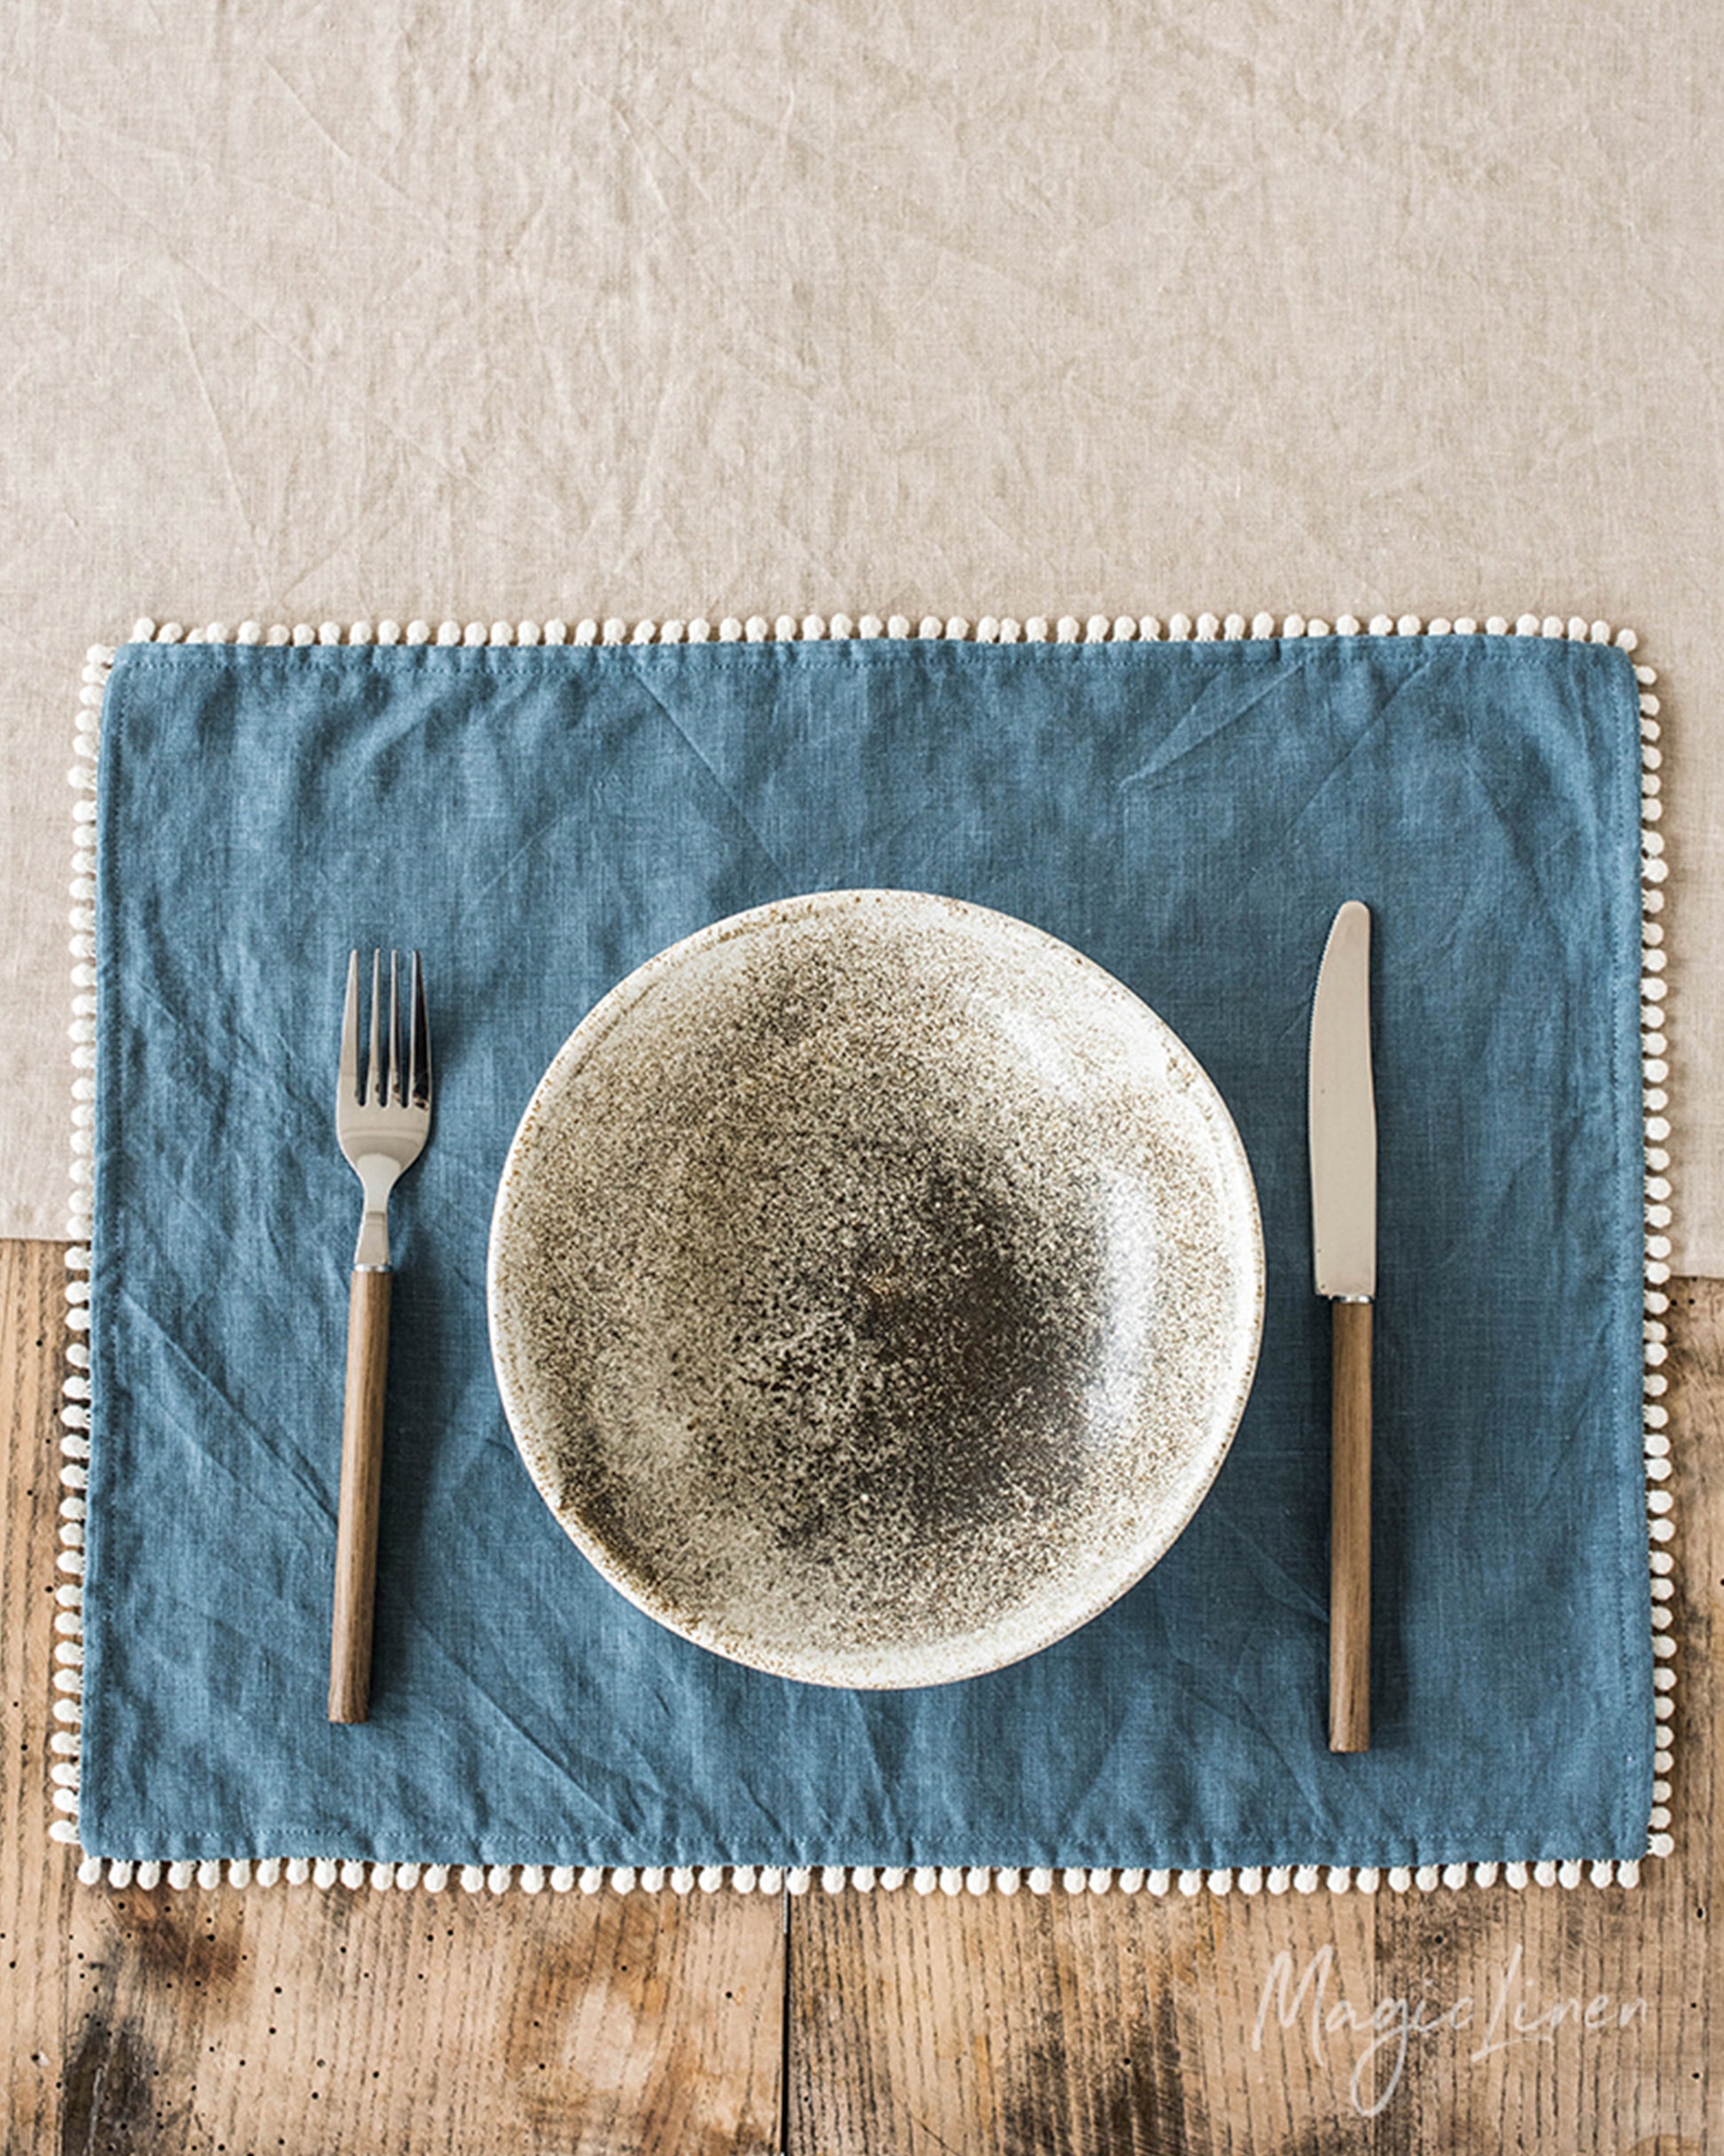 Pom pom trim linen placemat set of 2 in Gray blue - MagicLinen